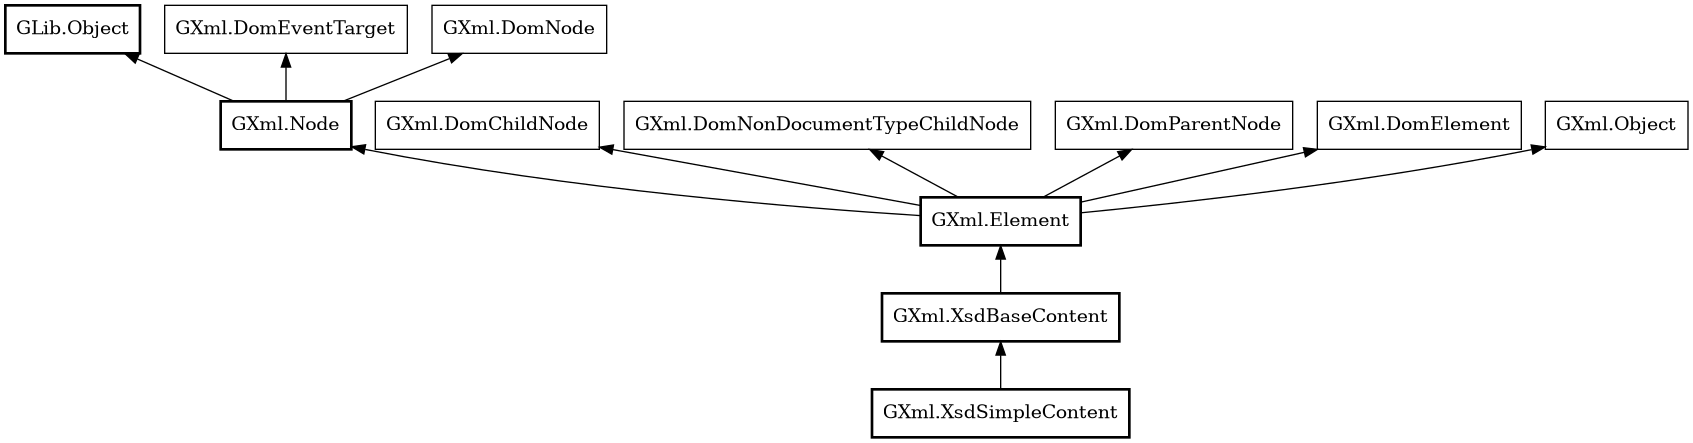 Object hierarchy for XsdSimpleContent